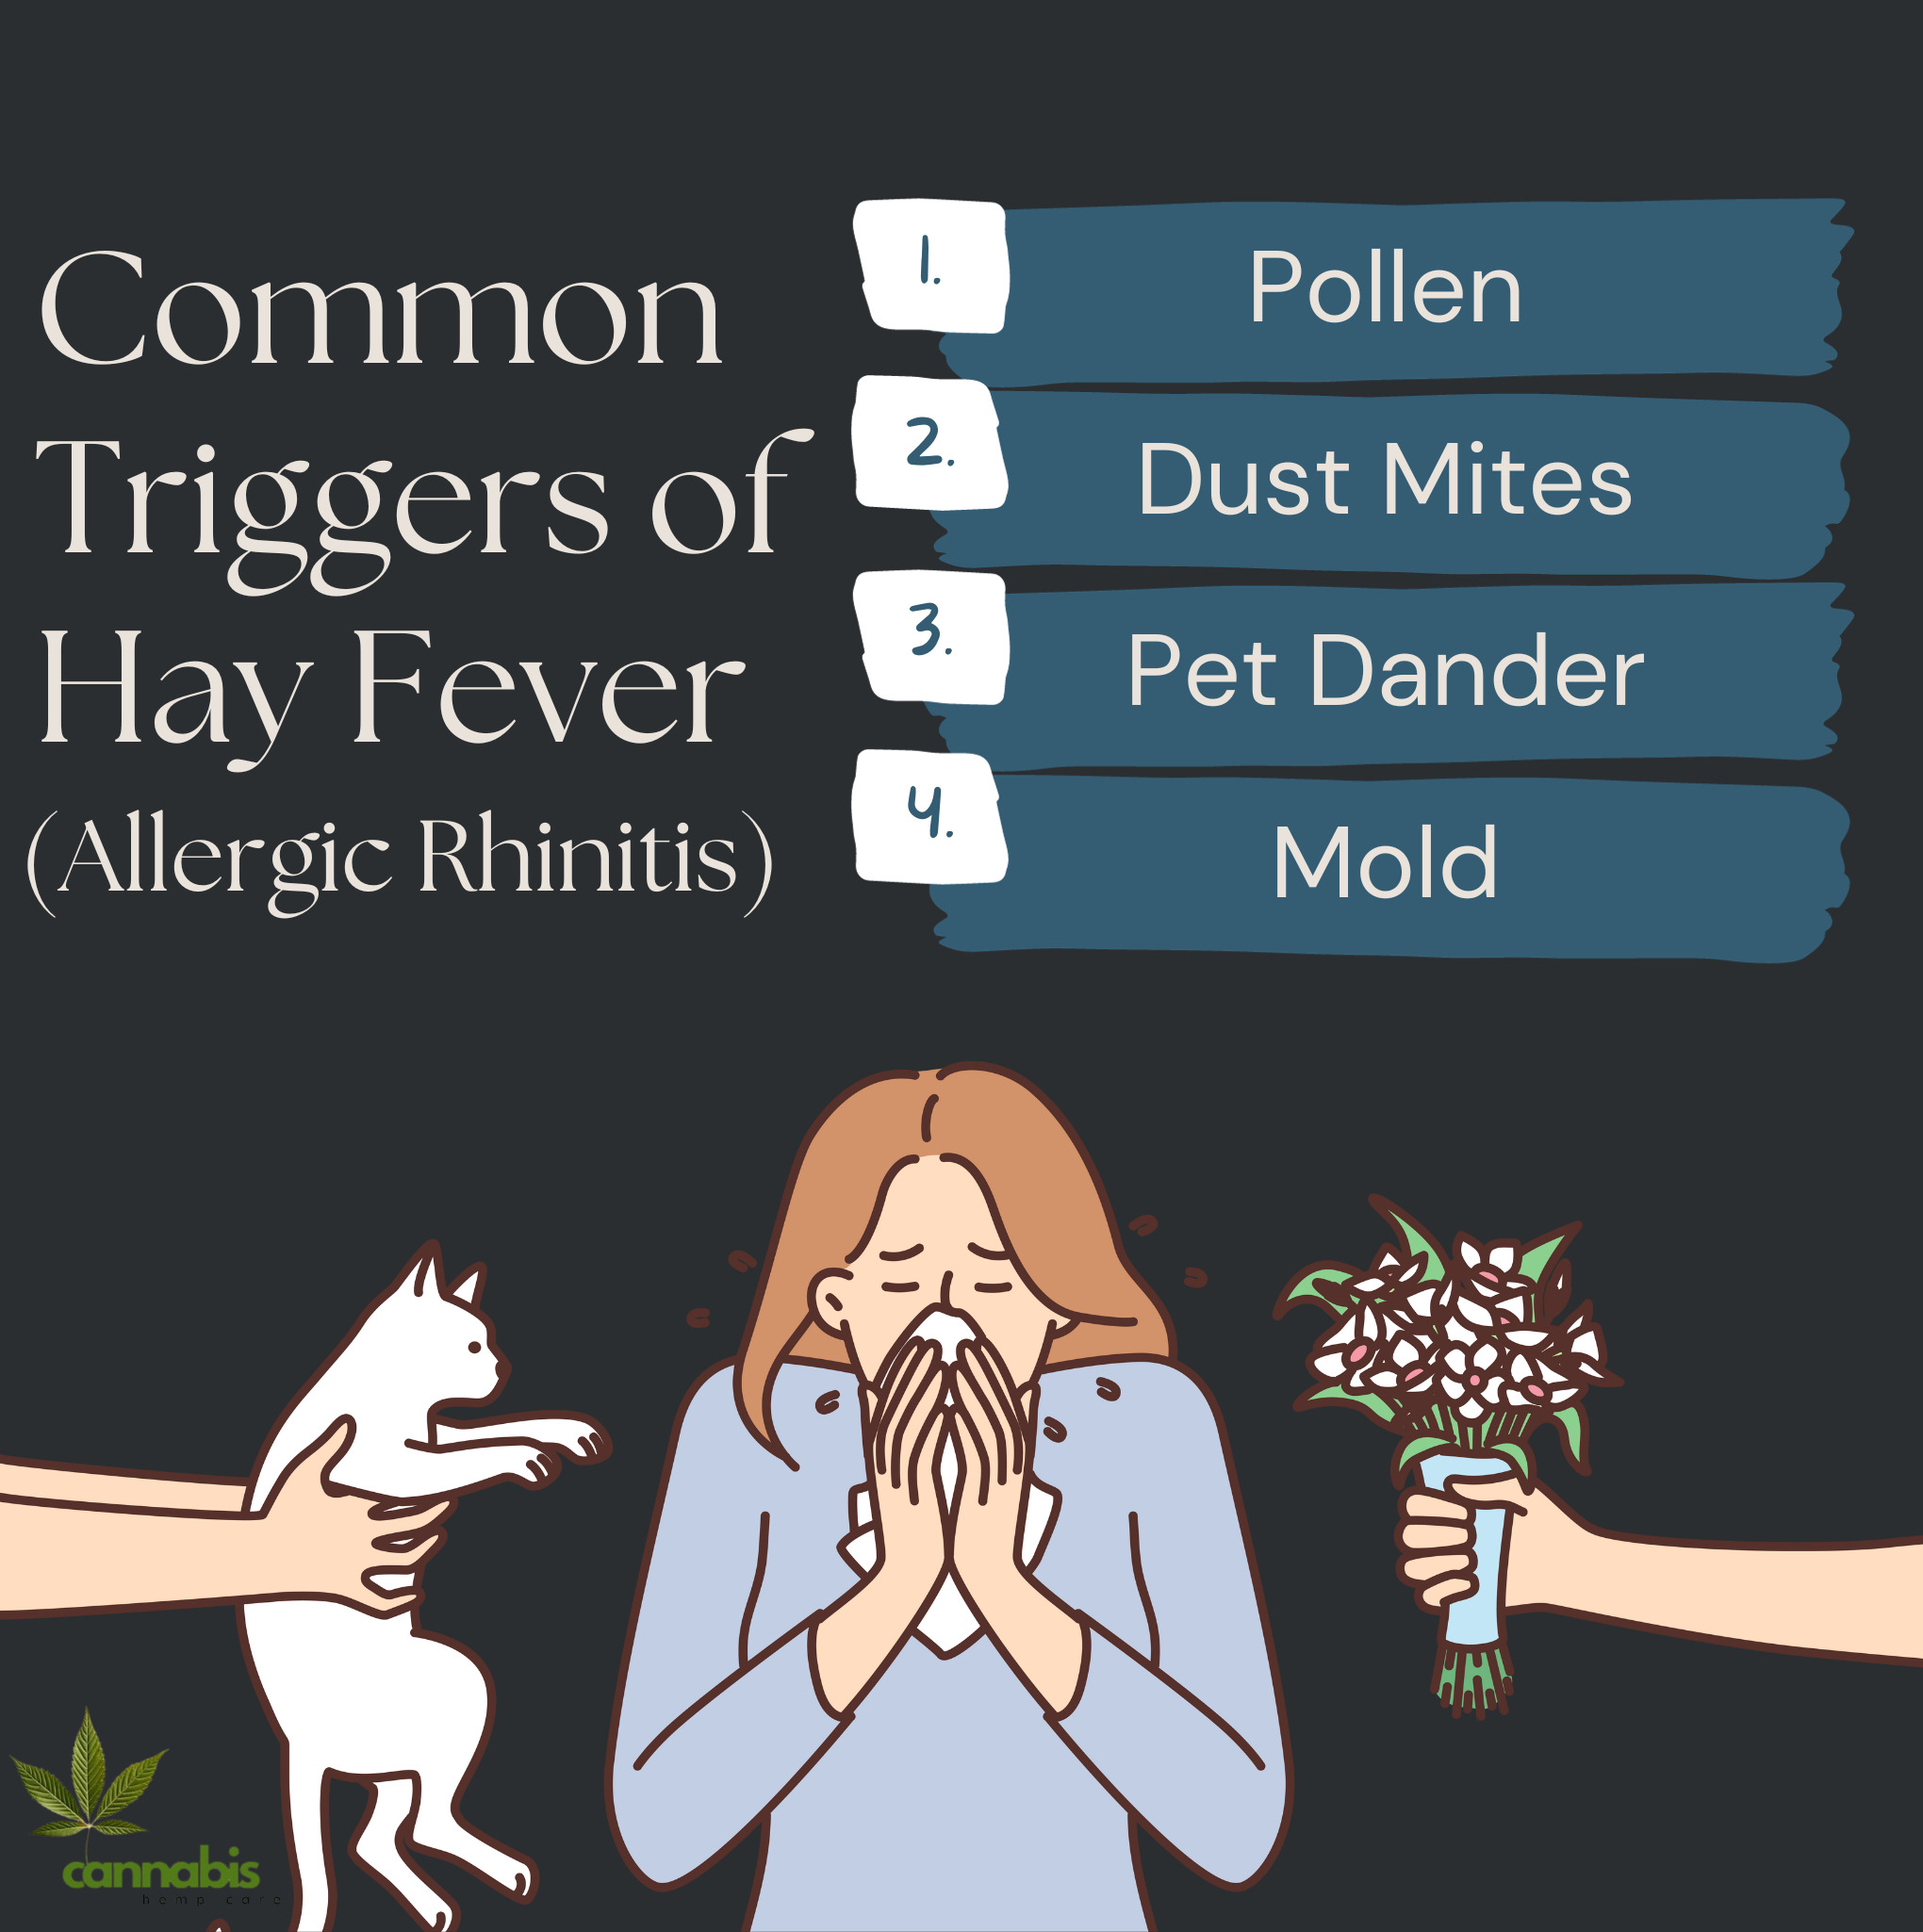 Common Triggers of Hay Fever